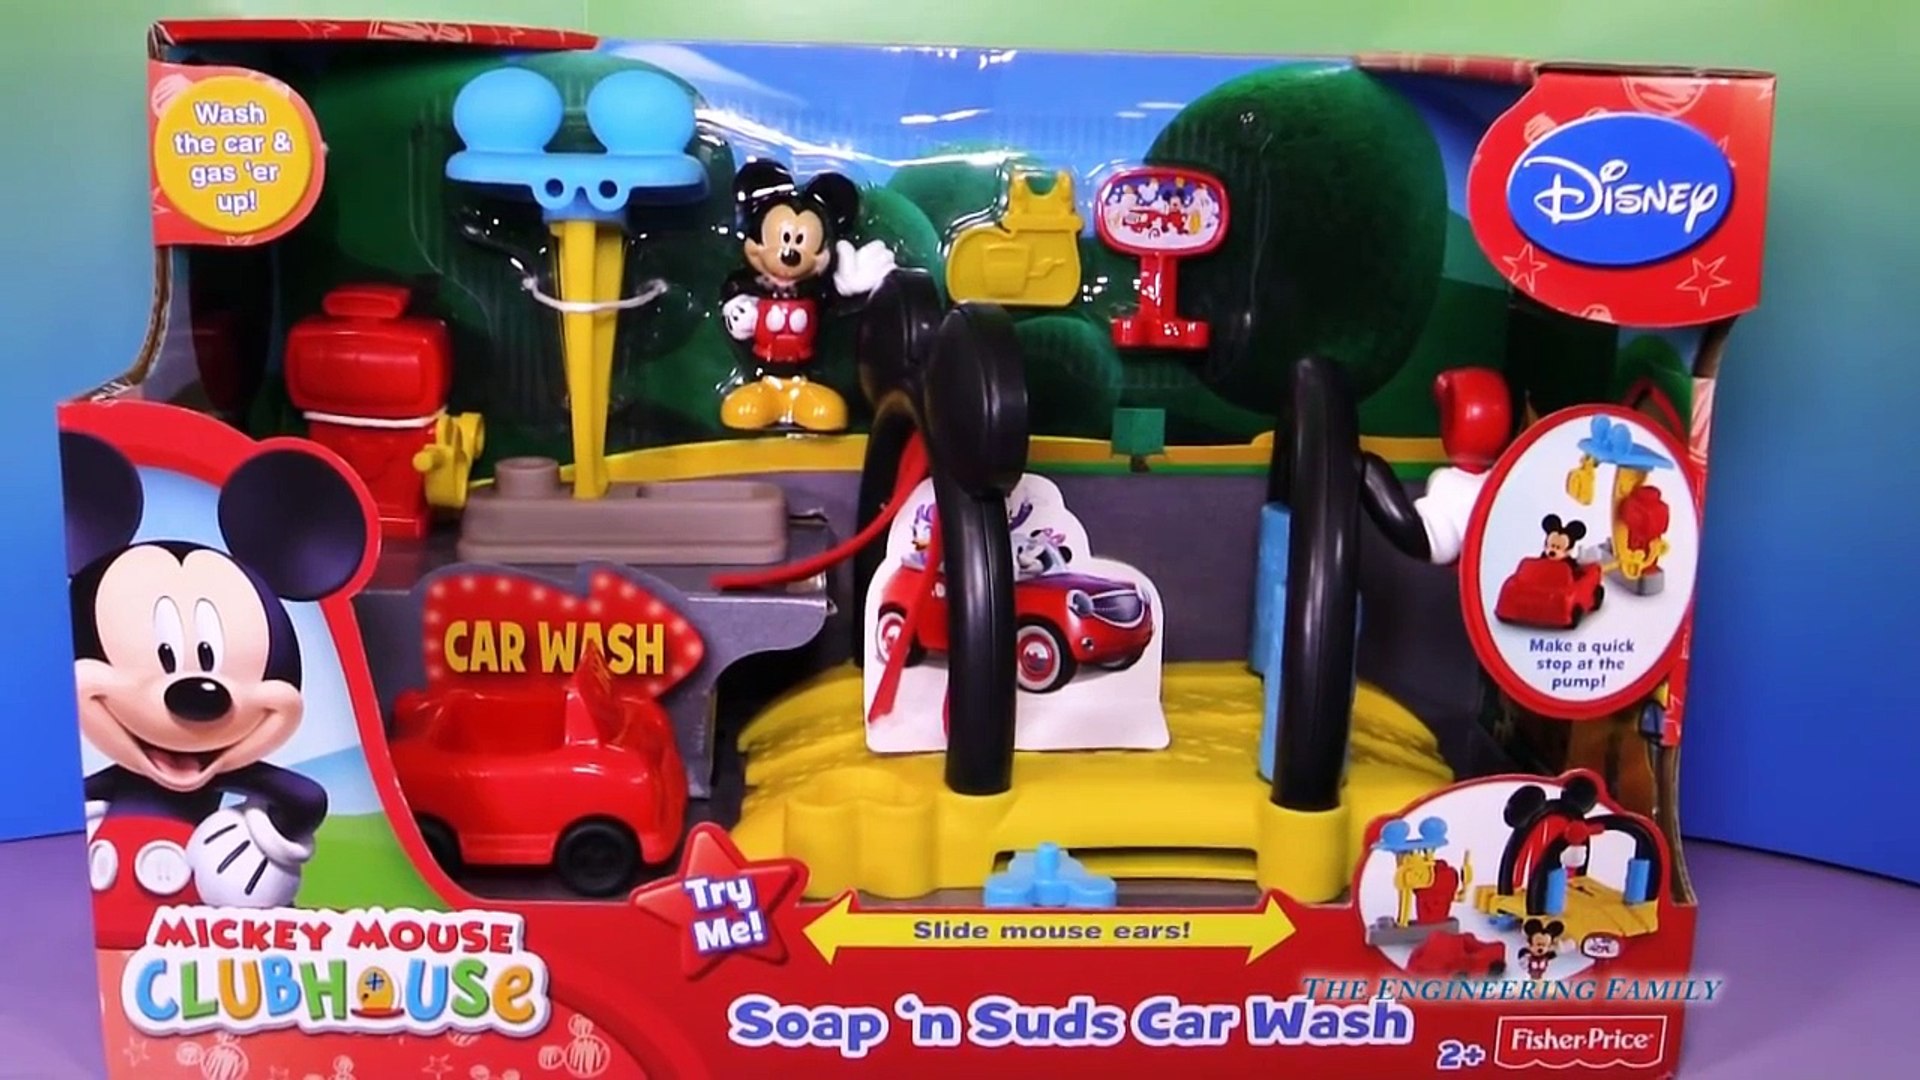 MICKEY MOUSE CLUBHOUSE Disney Junior Mickey Mouse Car Wash a Mickey Mouse  Video Toy Review - Dailymotion Video